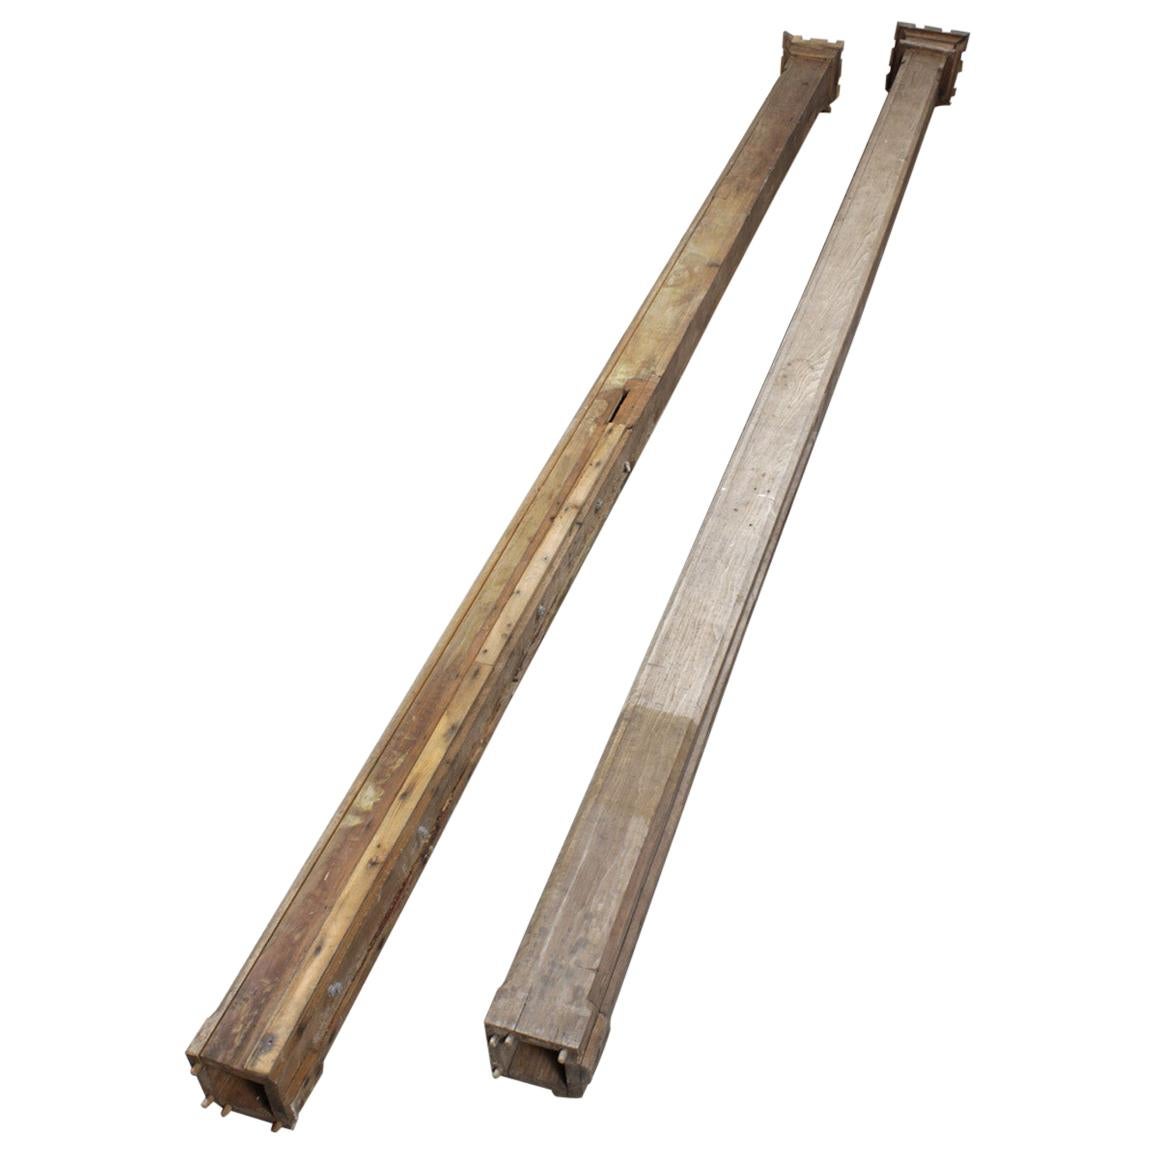 Old Hollow Square Wooden Pillars, 20th Century For Sale